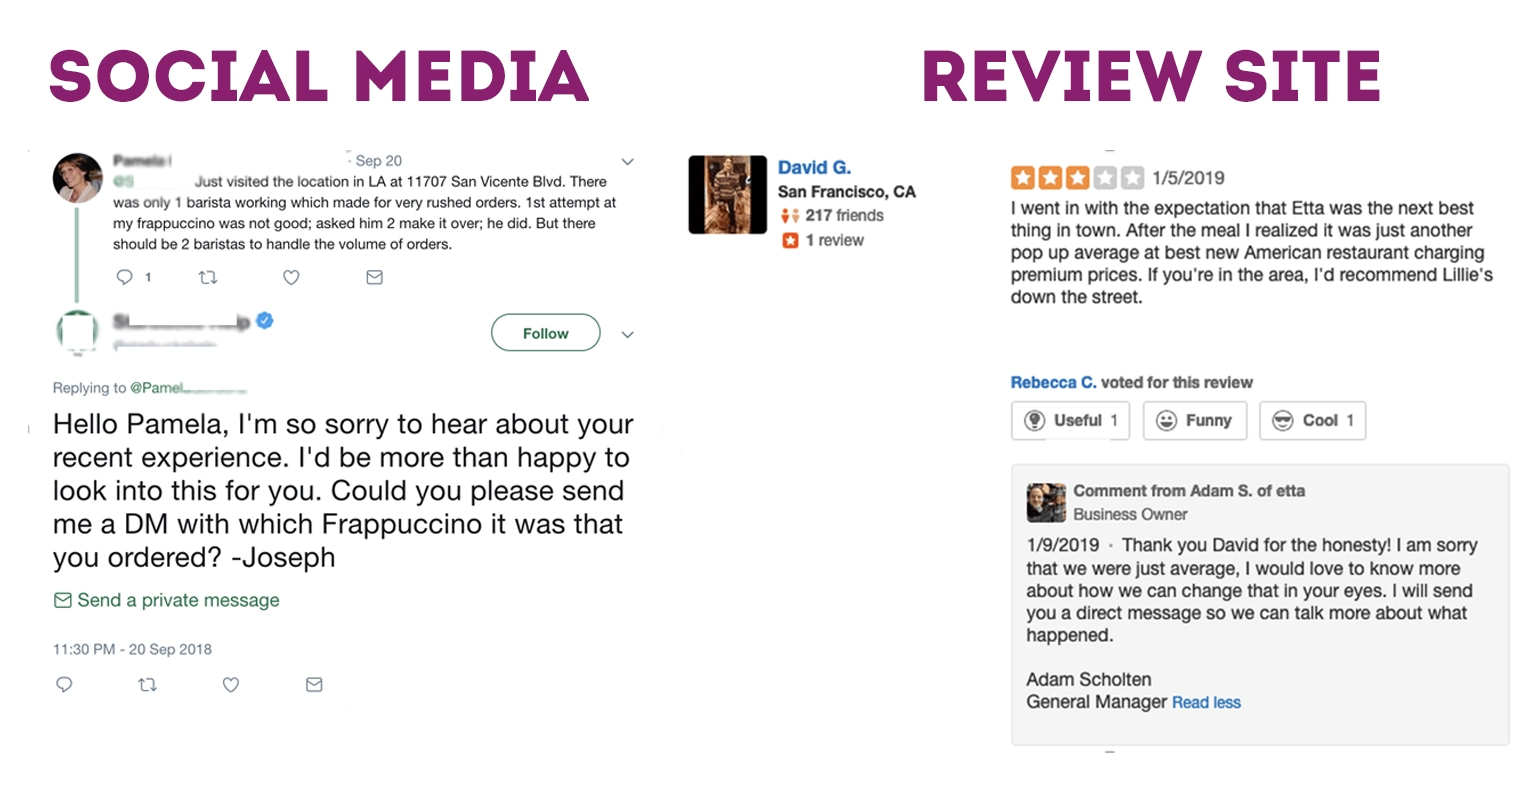 social media and review site reputation management for restaurants